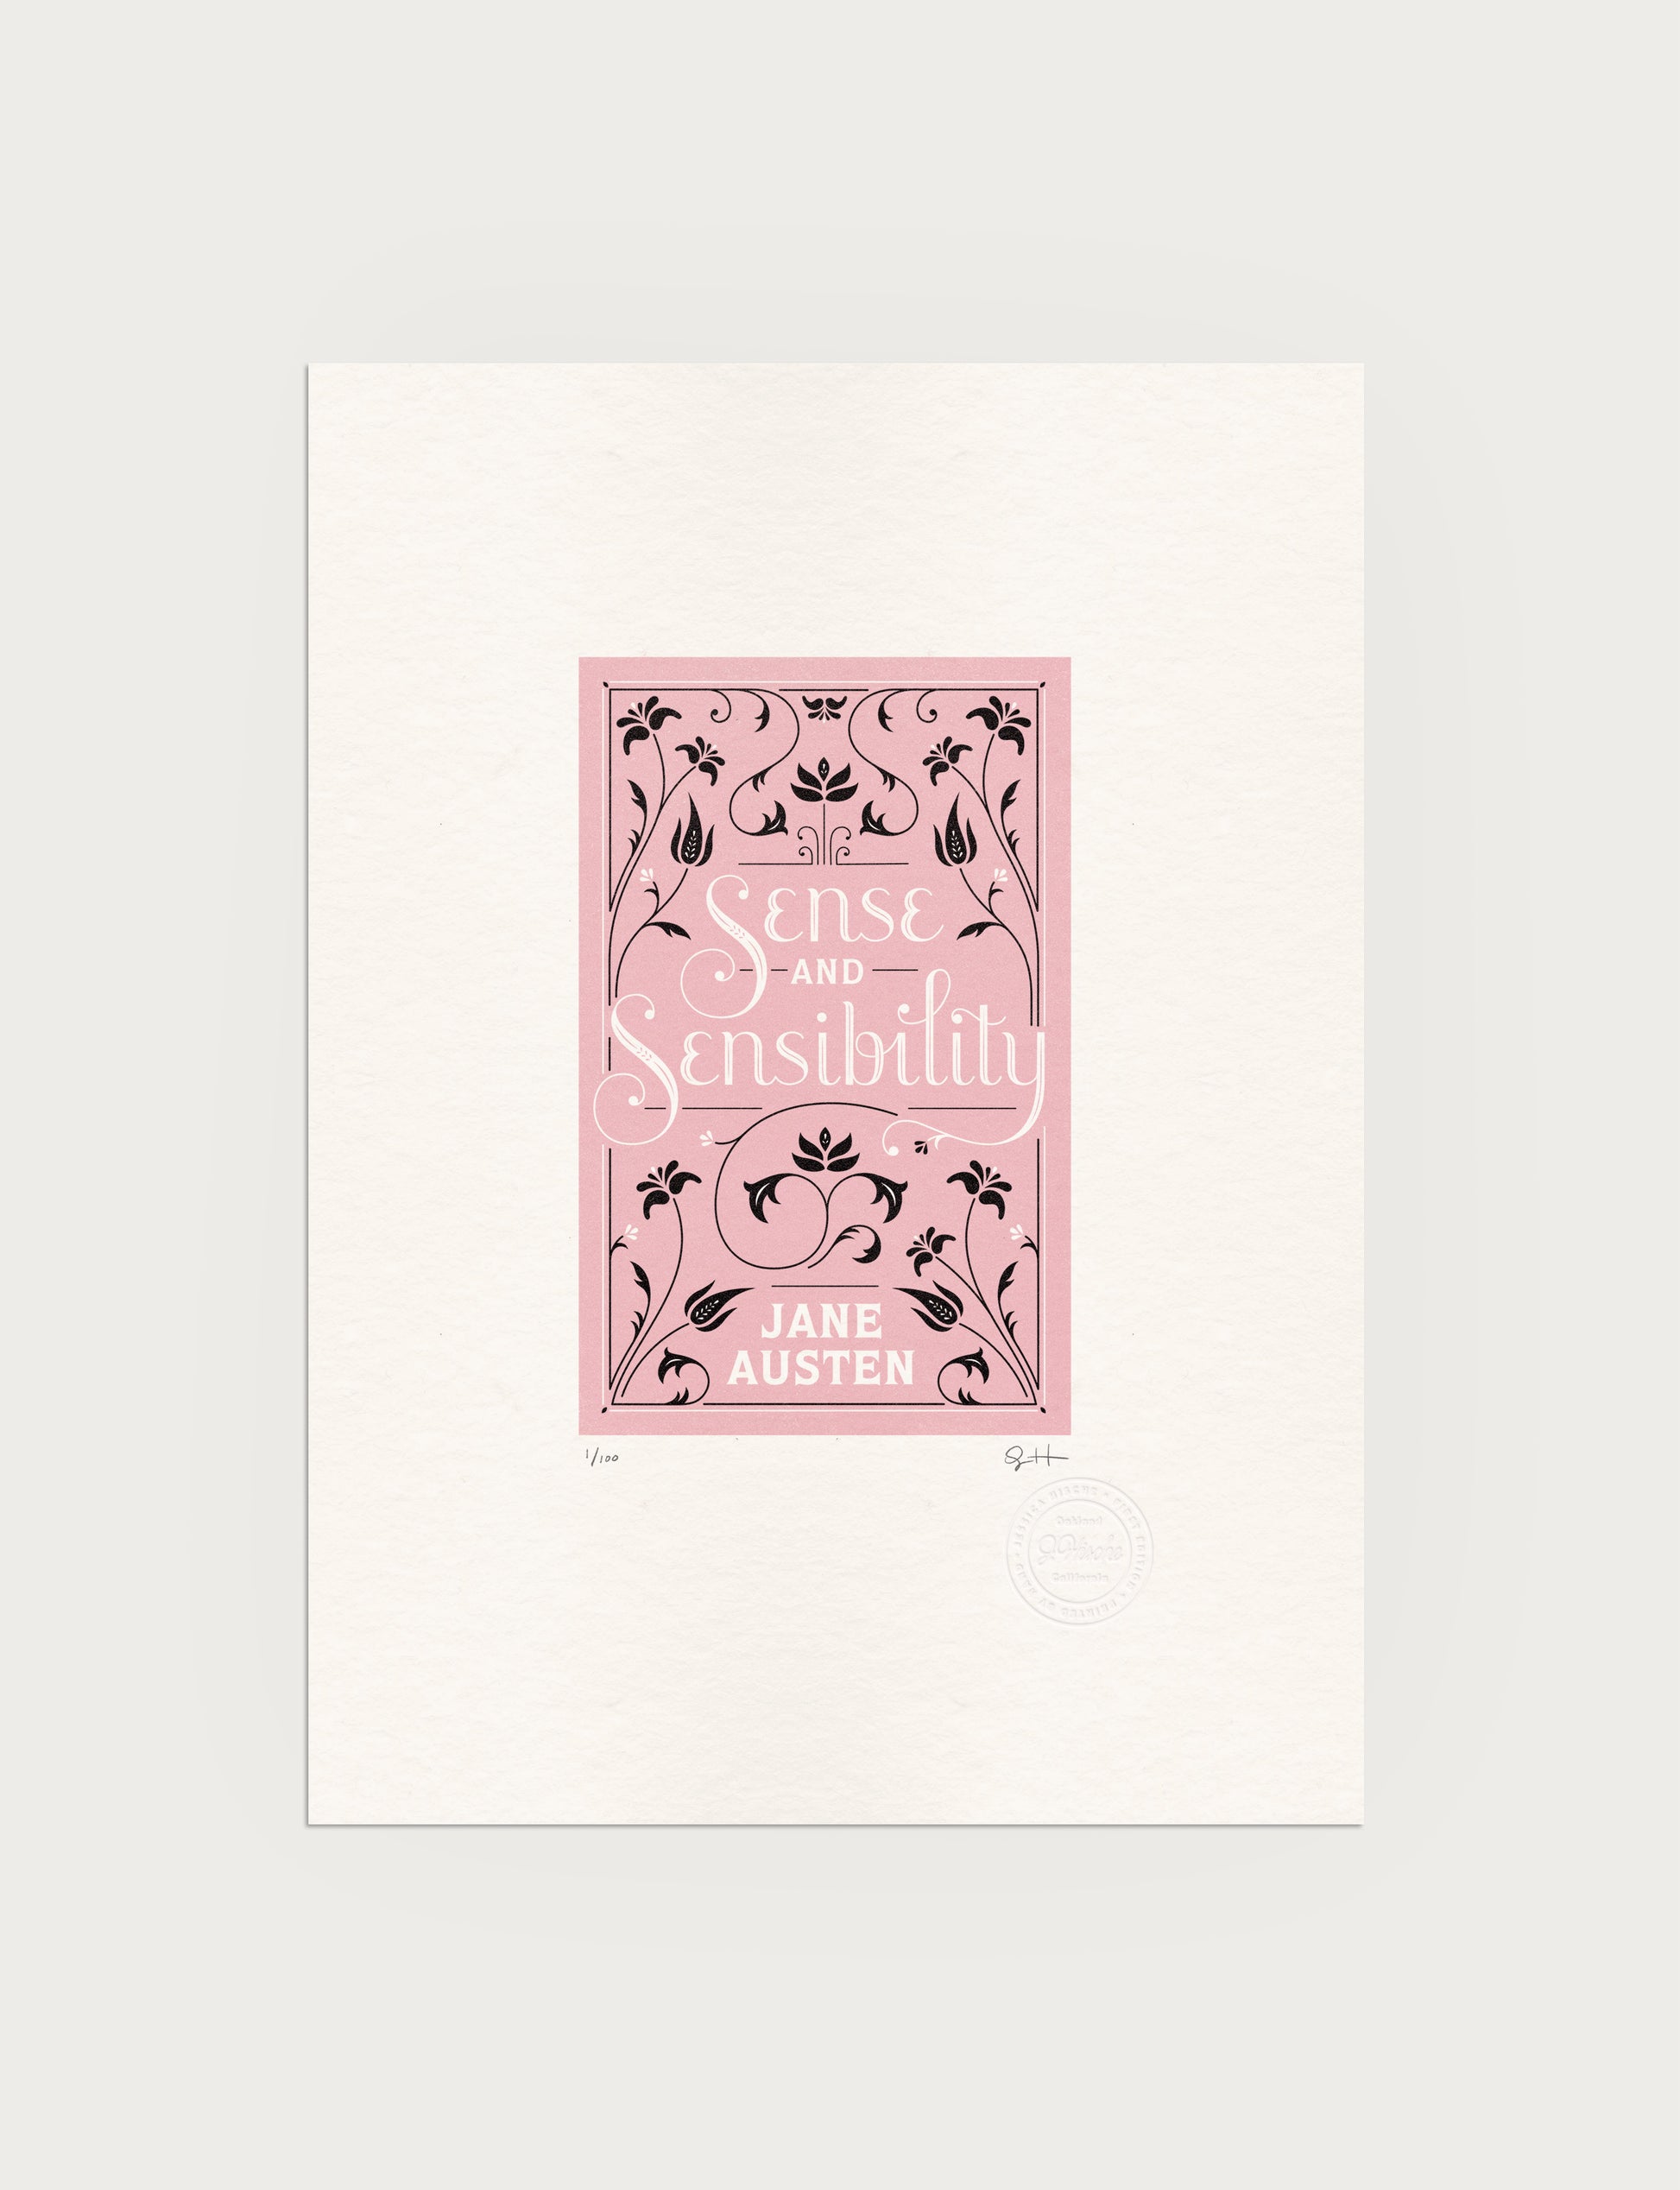 2-color letterpress print in pink and black. Printed artwork is an illustrated book cover of Sense and Sensibility including custom hand lettering.